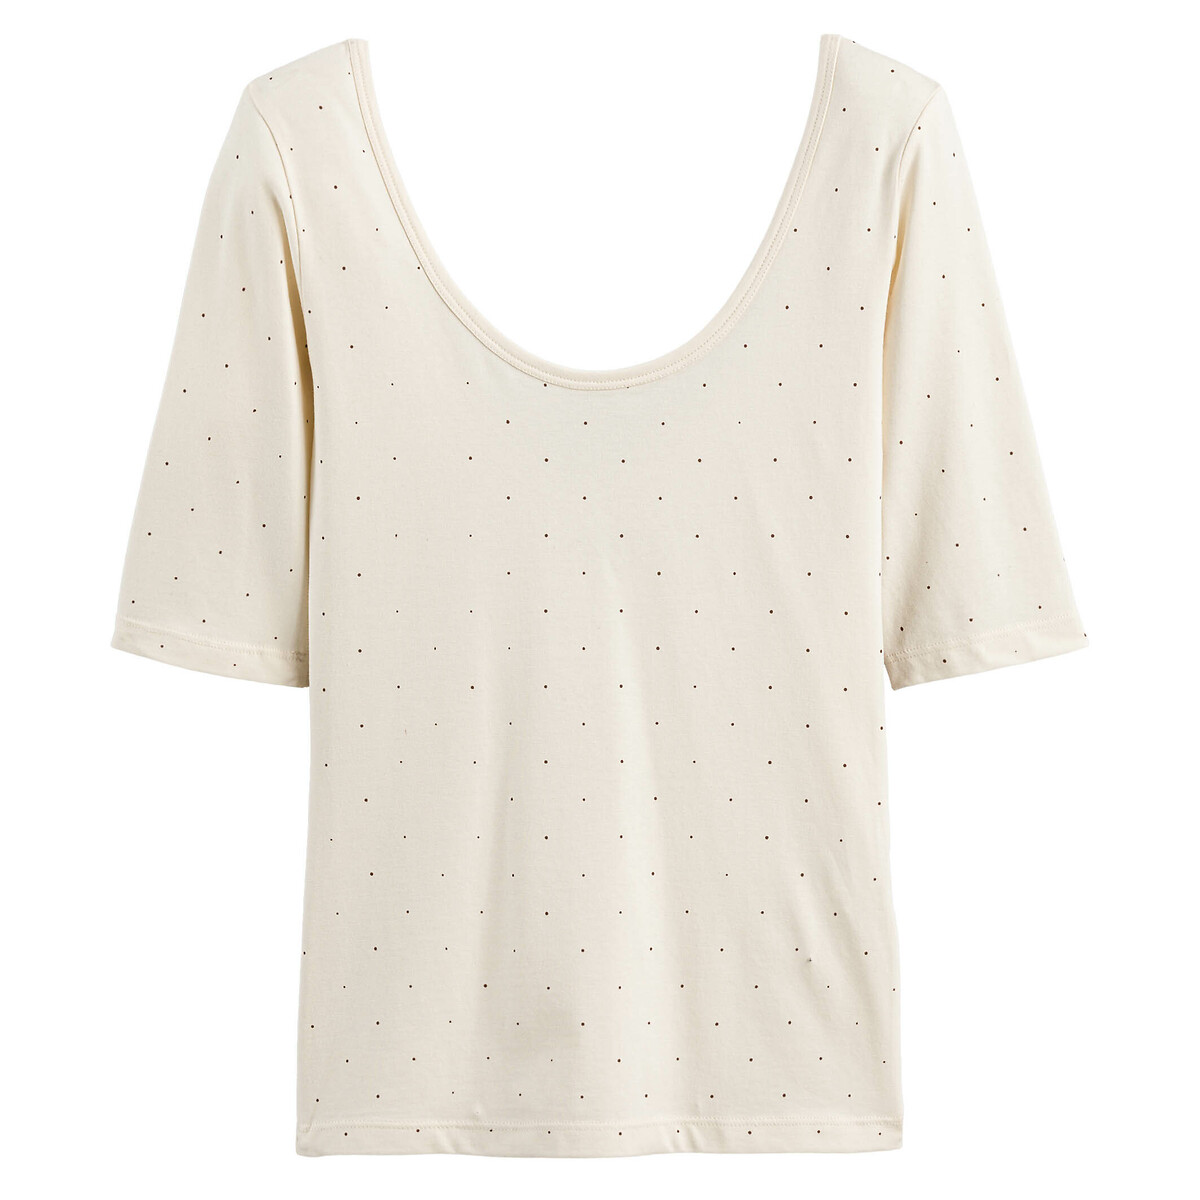 Polka Dot Cotton T-Shirt with Ballerina Neck and Short Sleeves